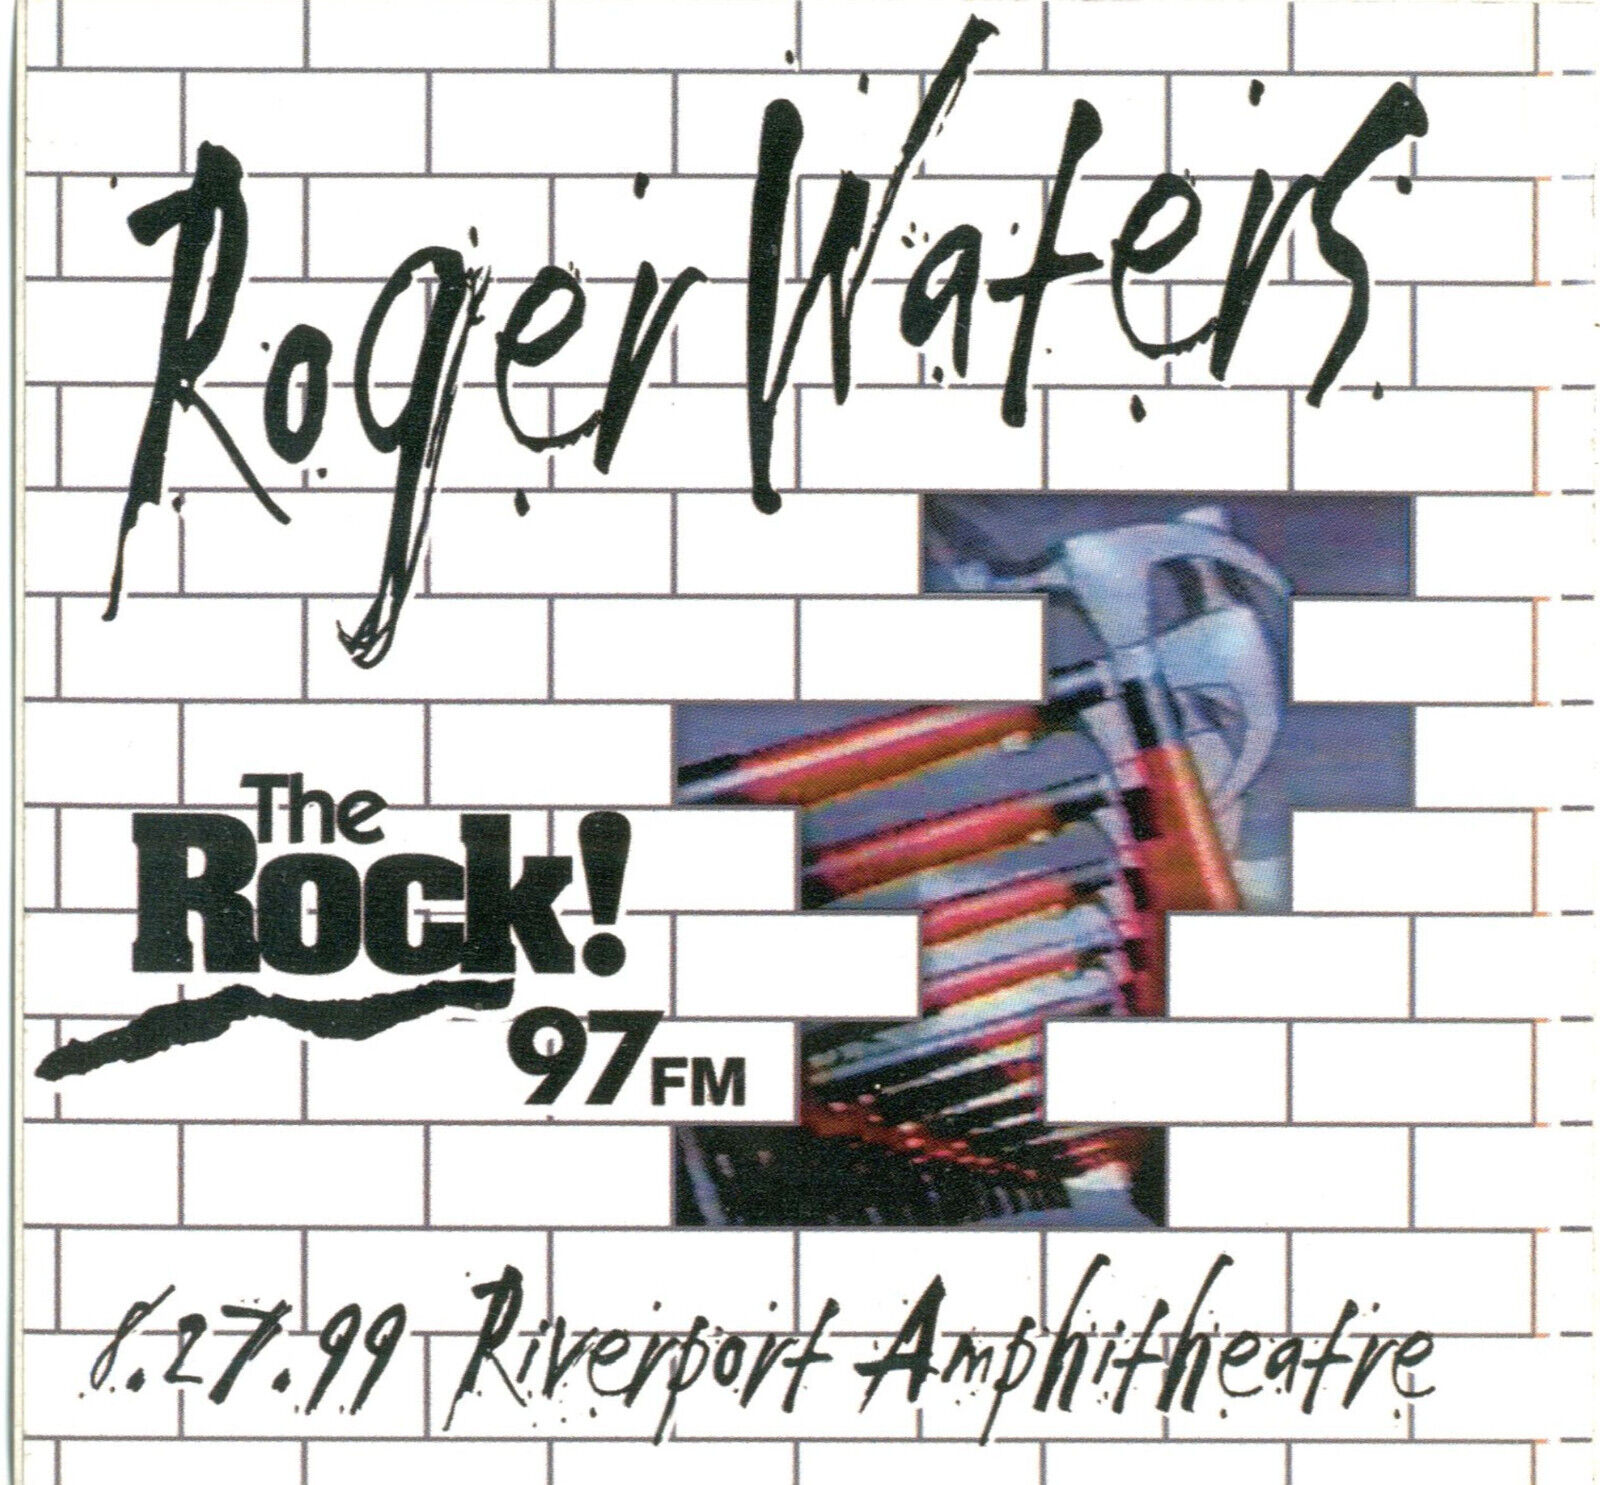 Roger Waters - The Rock 97 FM Sticker - Riverport - St. Louis, Mo. - 1999